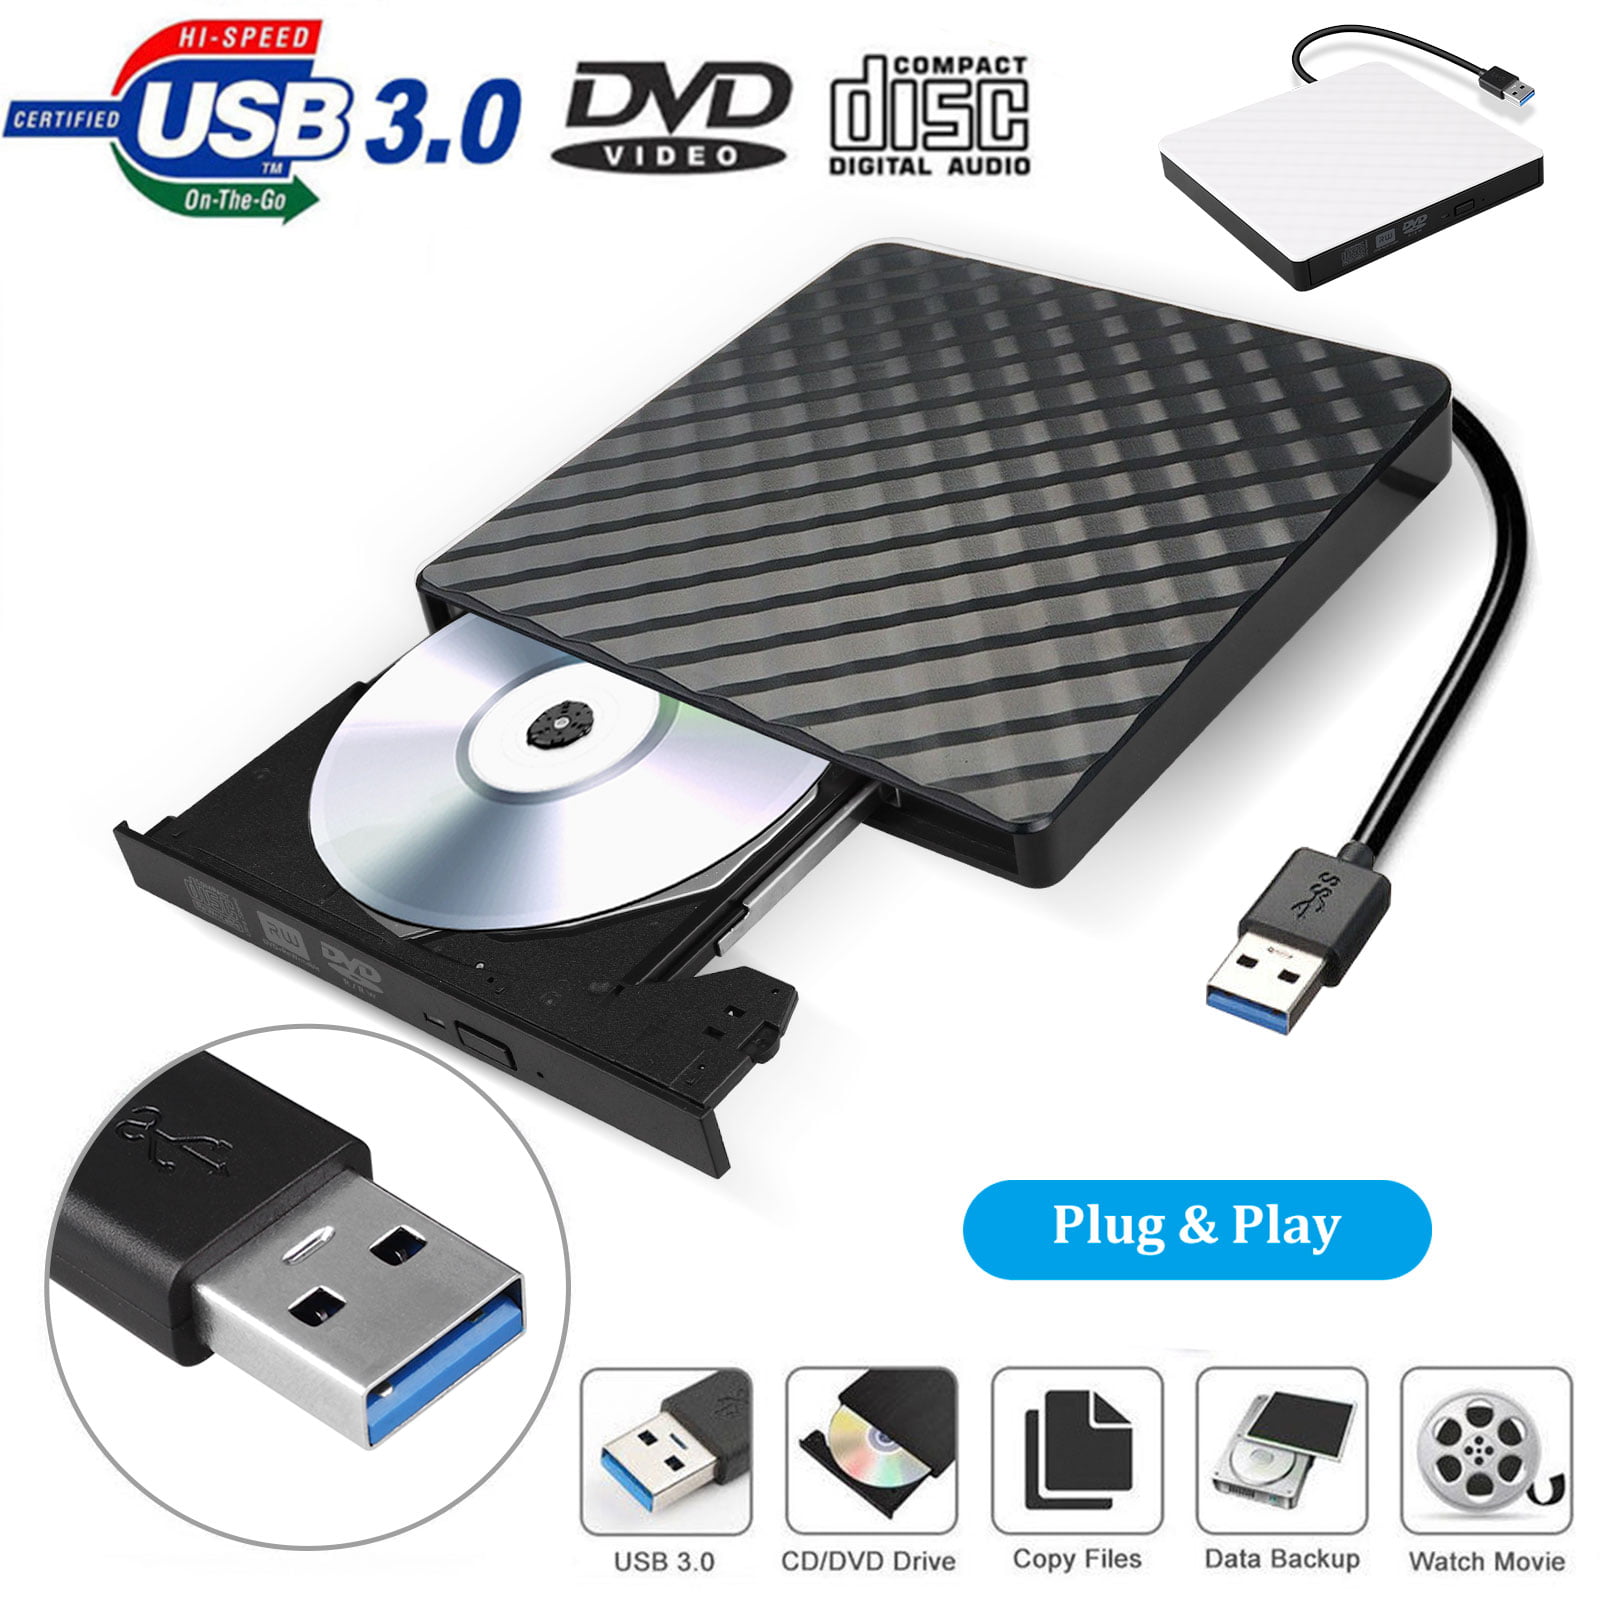 patch for dvd player in mac book 10.6.8